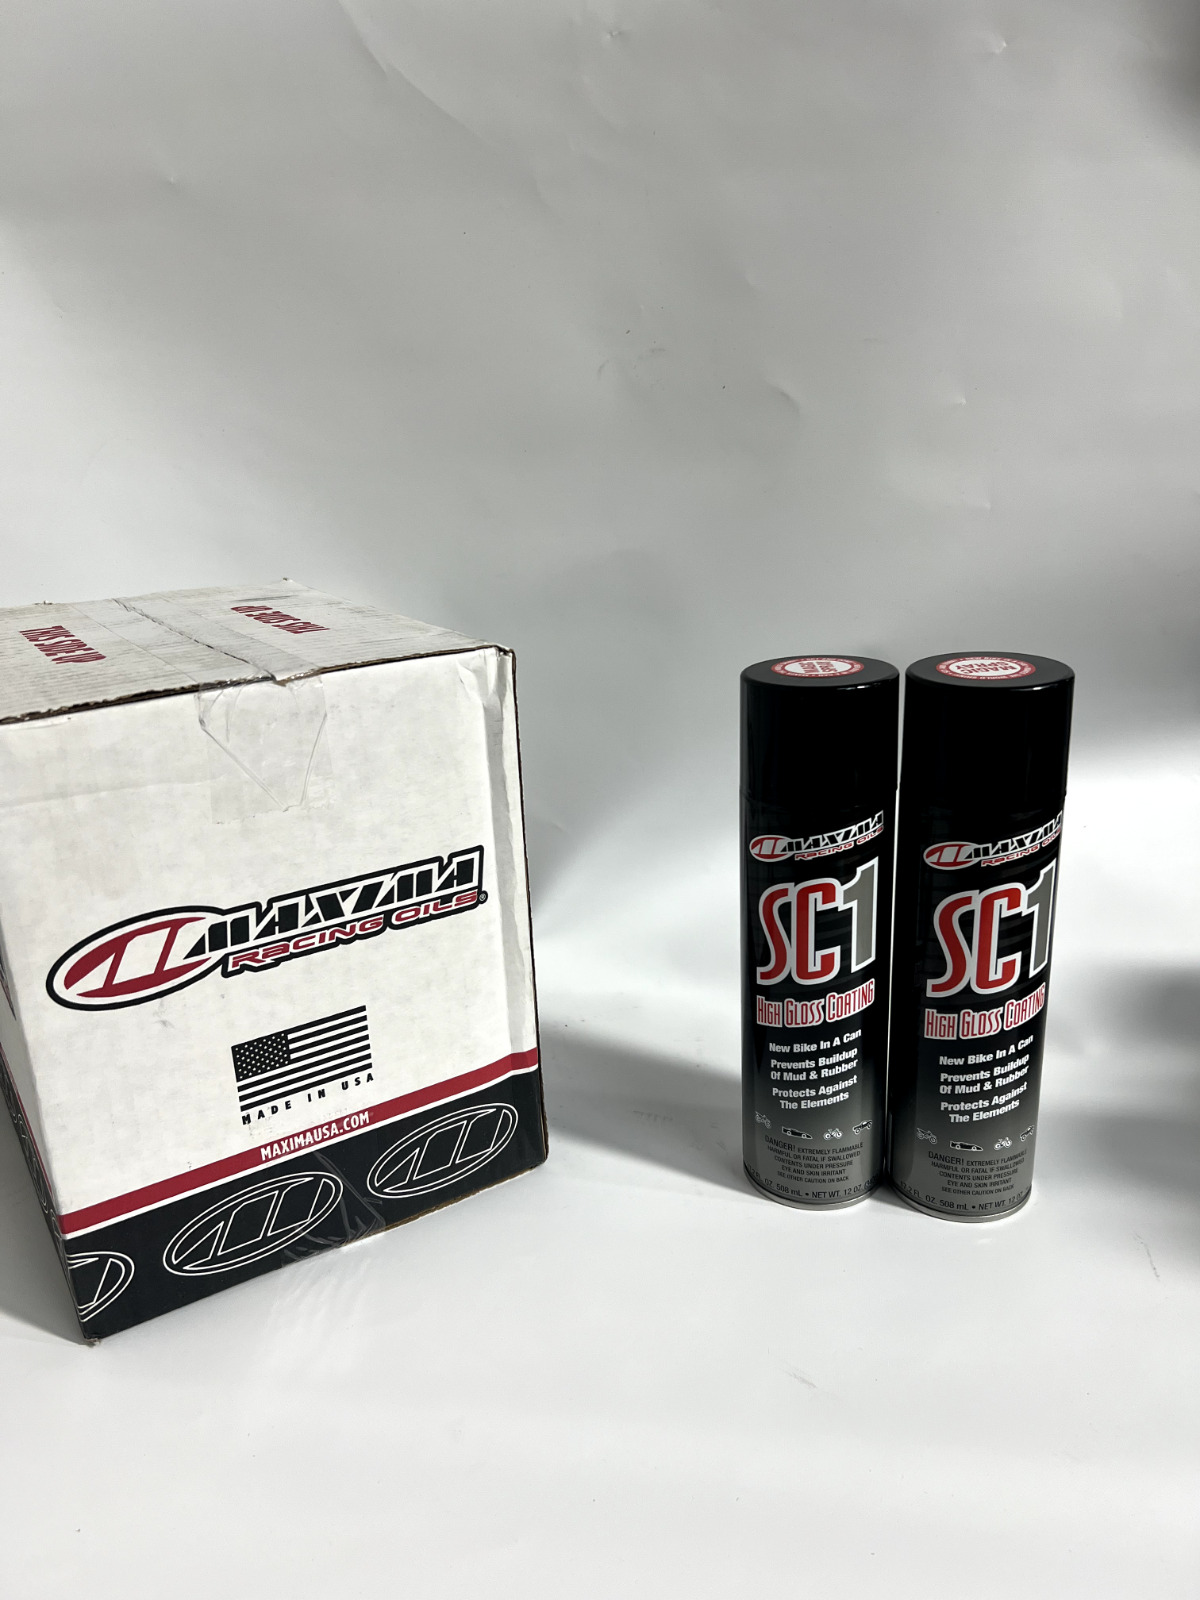 Maxima Racing Oils SC1 High Gloss Silicone Clear Coat 17.2oz. Spray (2 Cans)